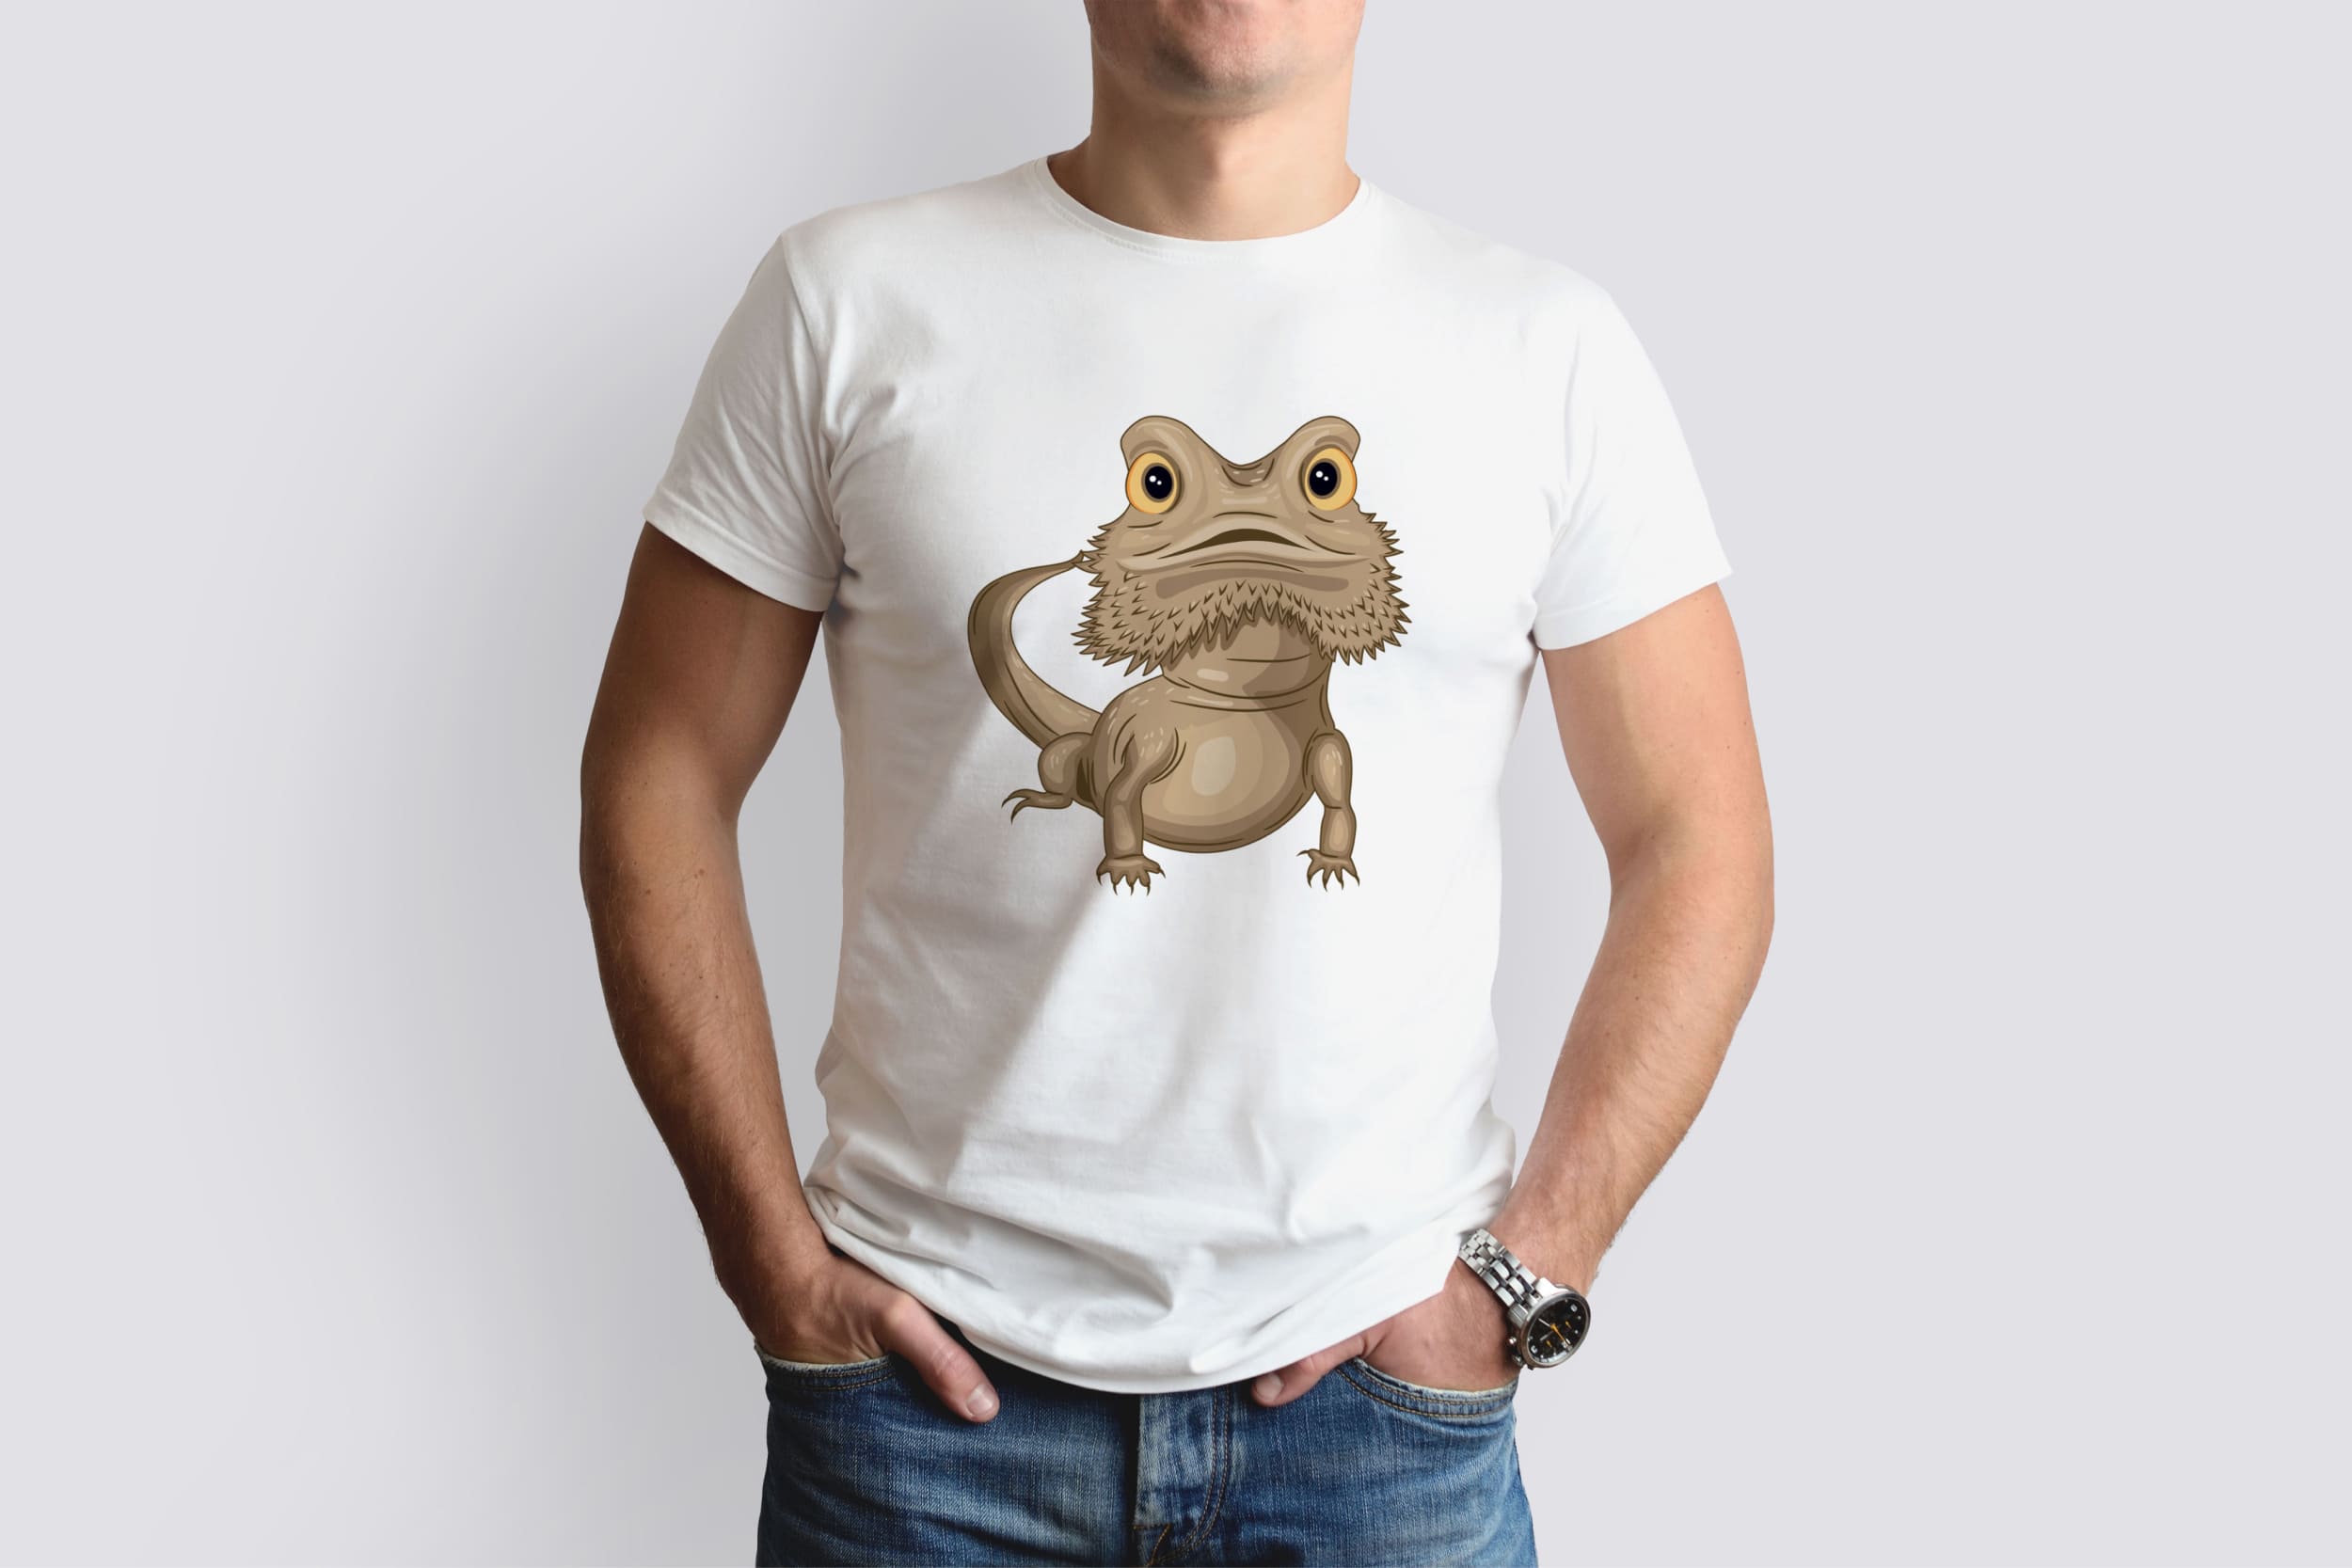 A white t-shirt on a man with an image of a brown bearded dragon, who looks ahead.